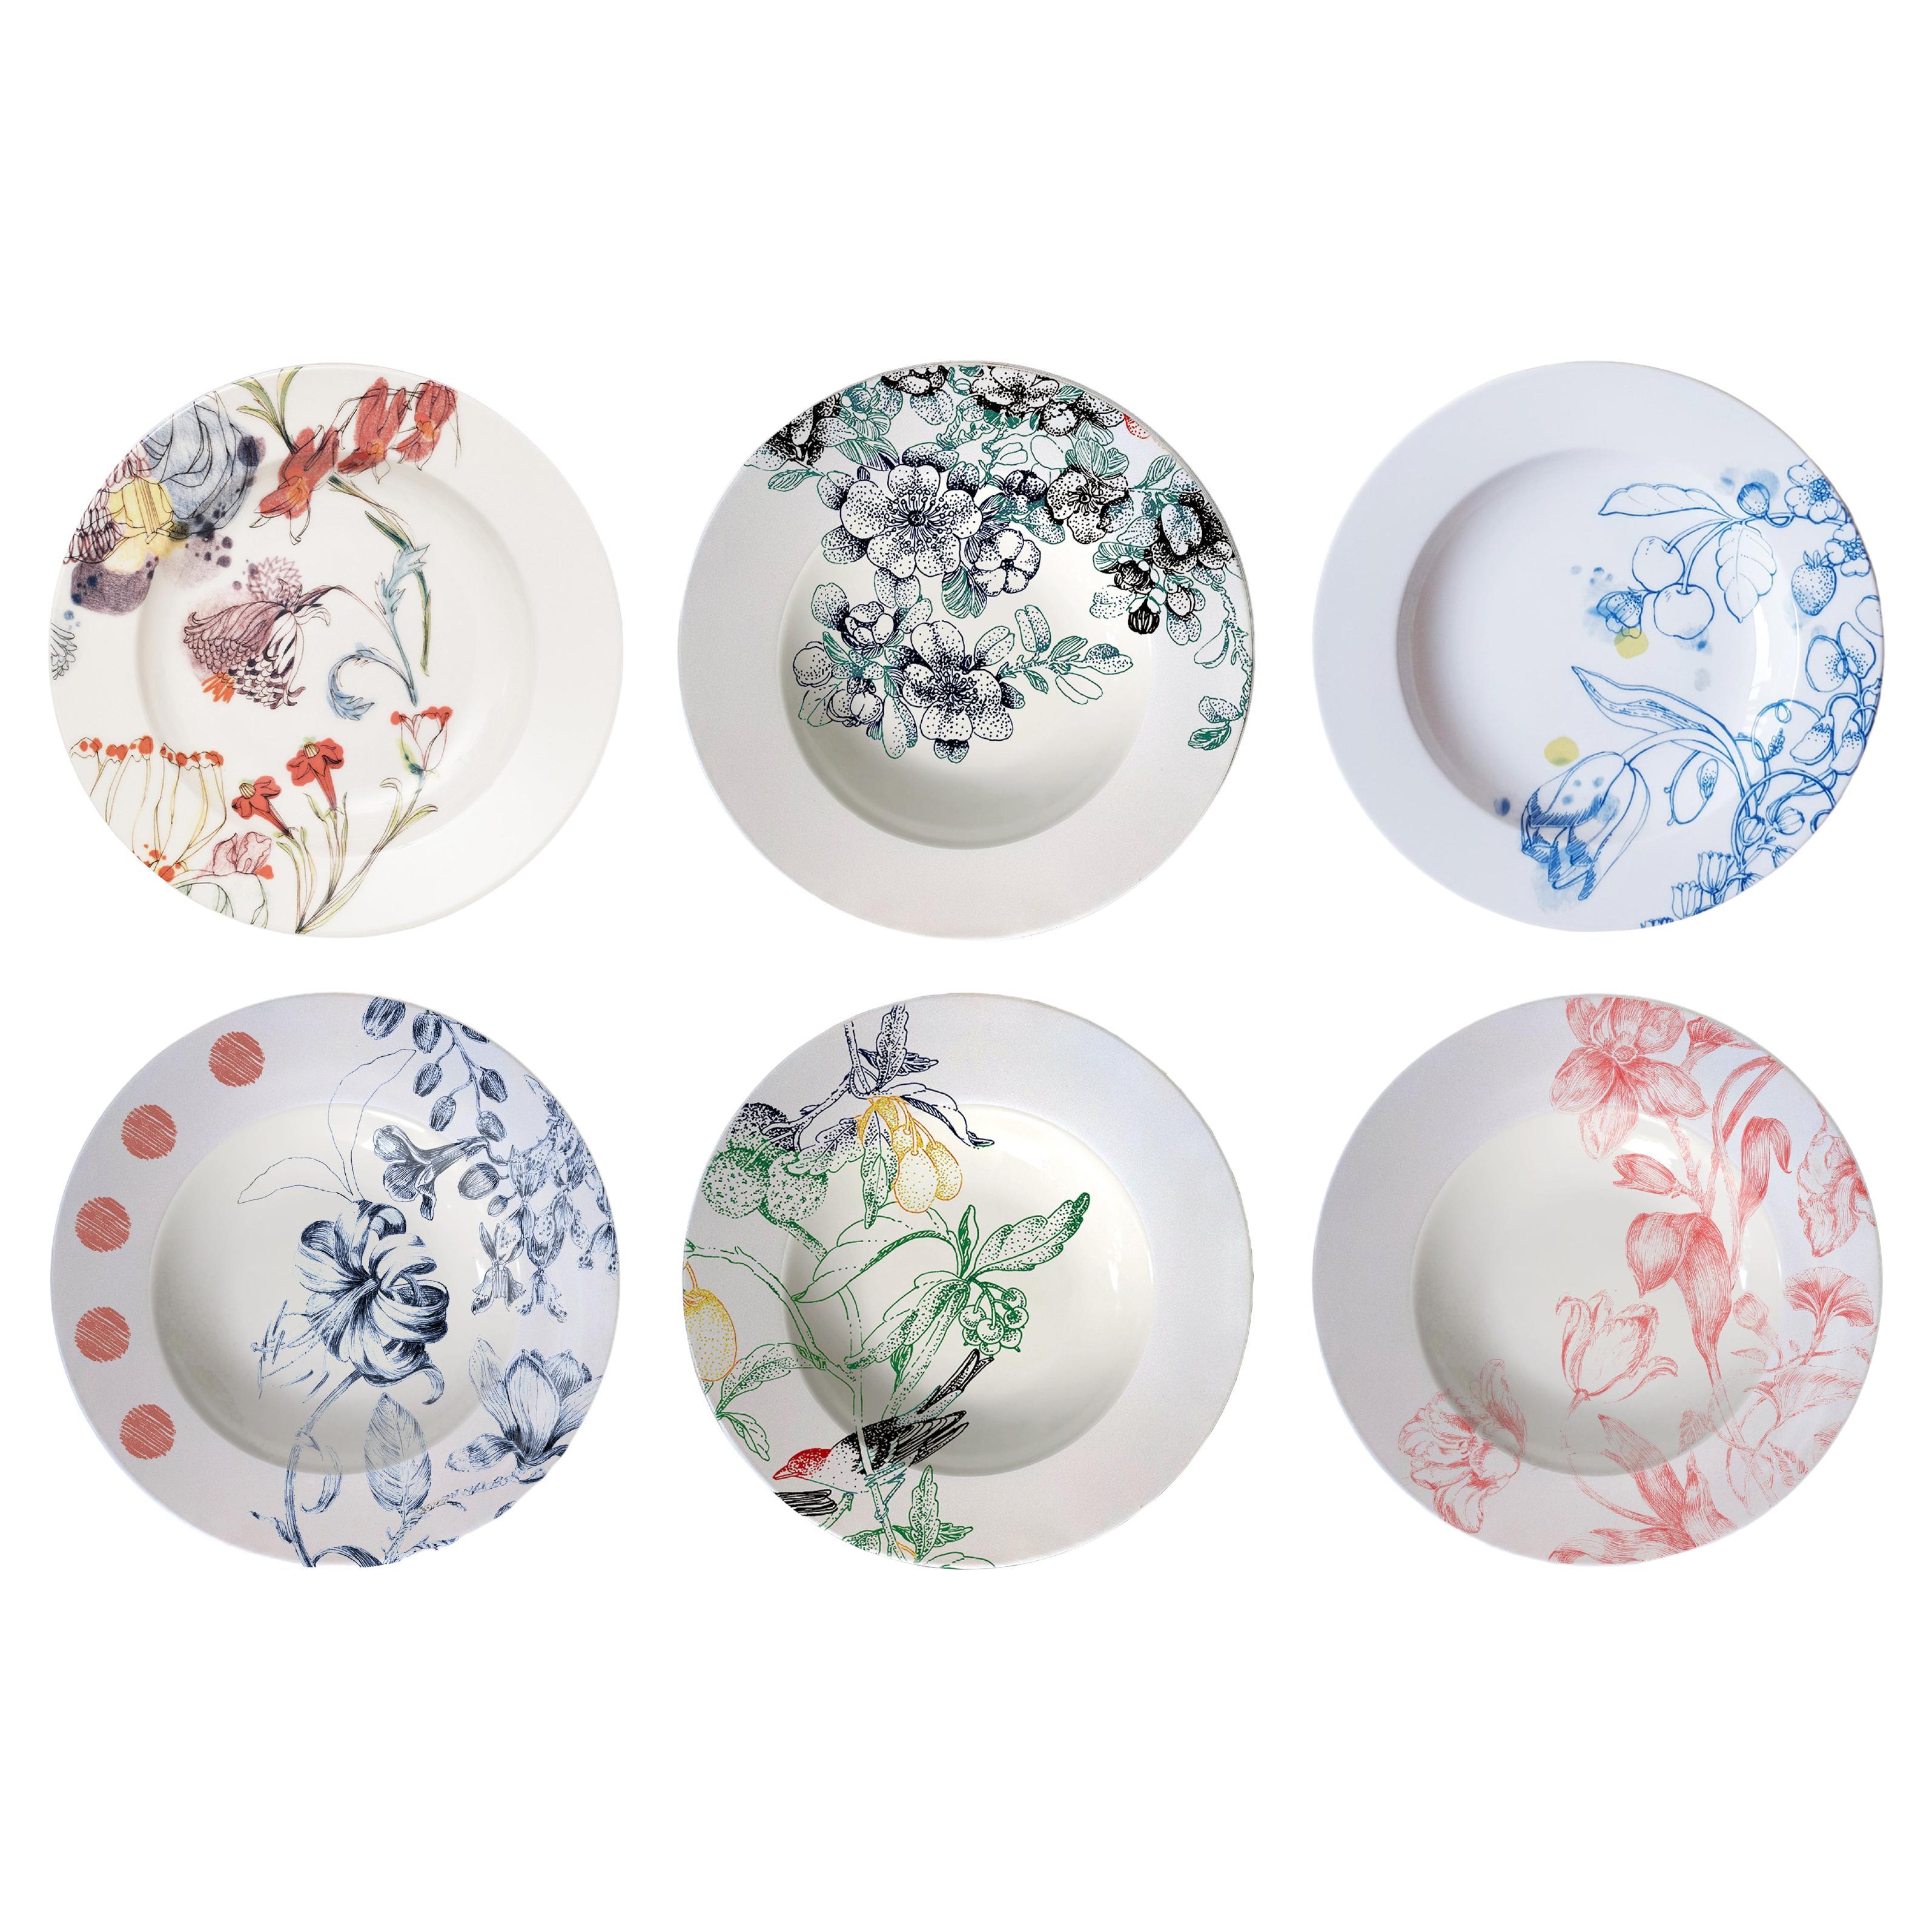 Mix & Match, Six Contemporary Porcelain Pasta Plates with Flowers and Birds For Sale